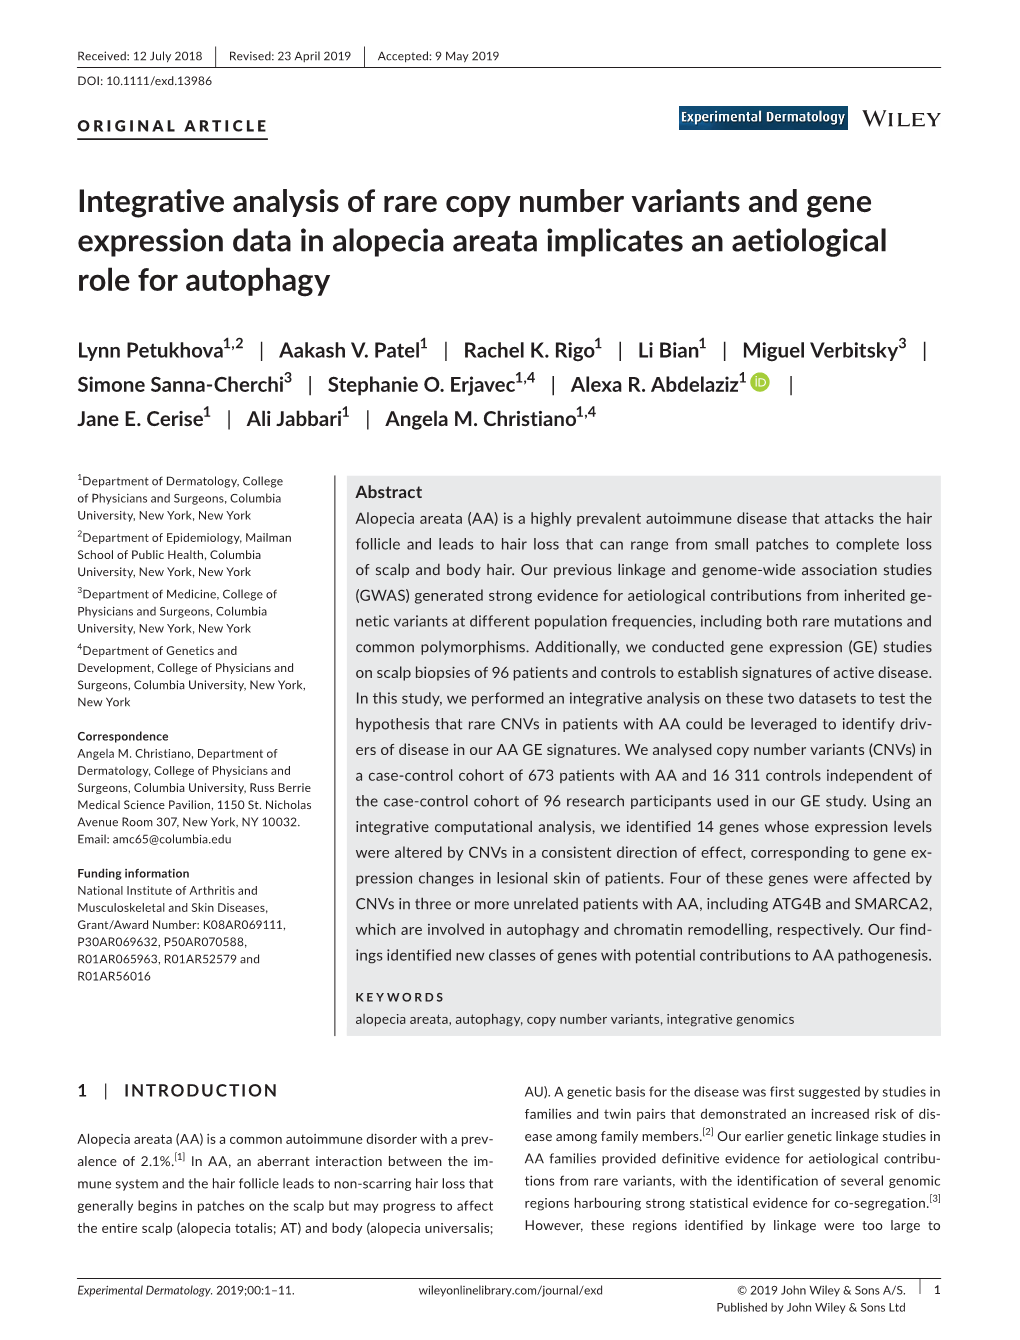 Integrative Analysis of Rare Copy Number Variants and Gene Expression Data in Alopecia Areata Implicates an Aetiological Role for Autophagy